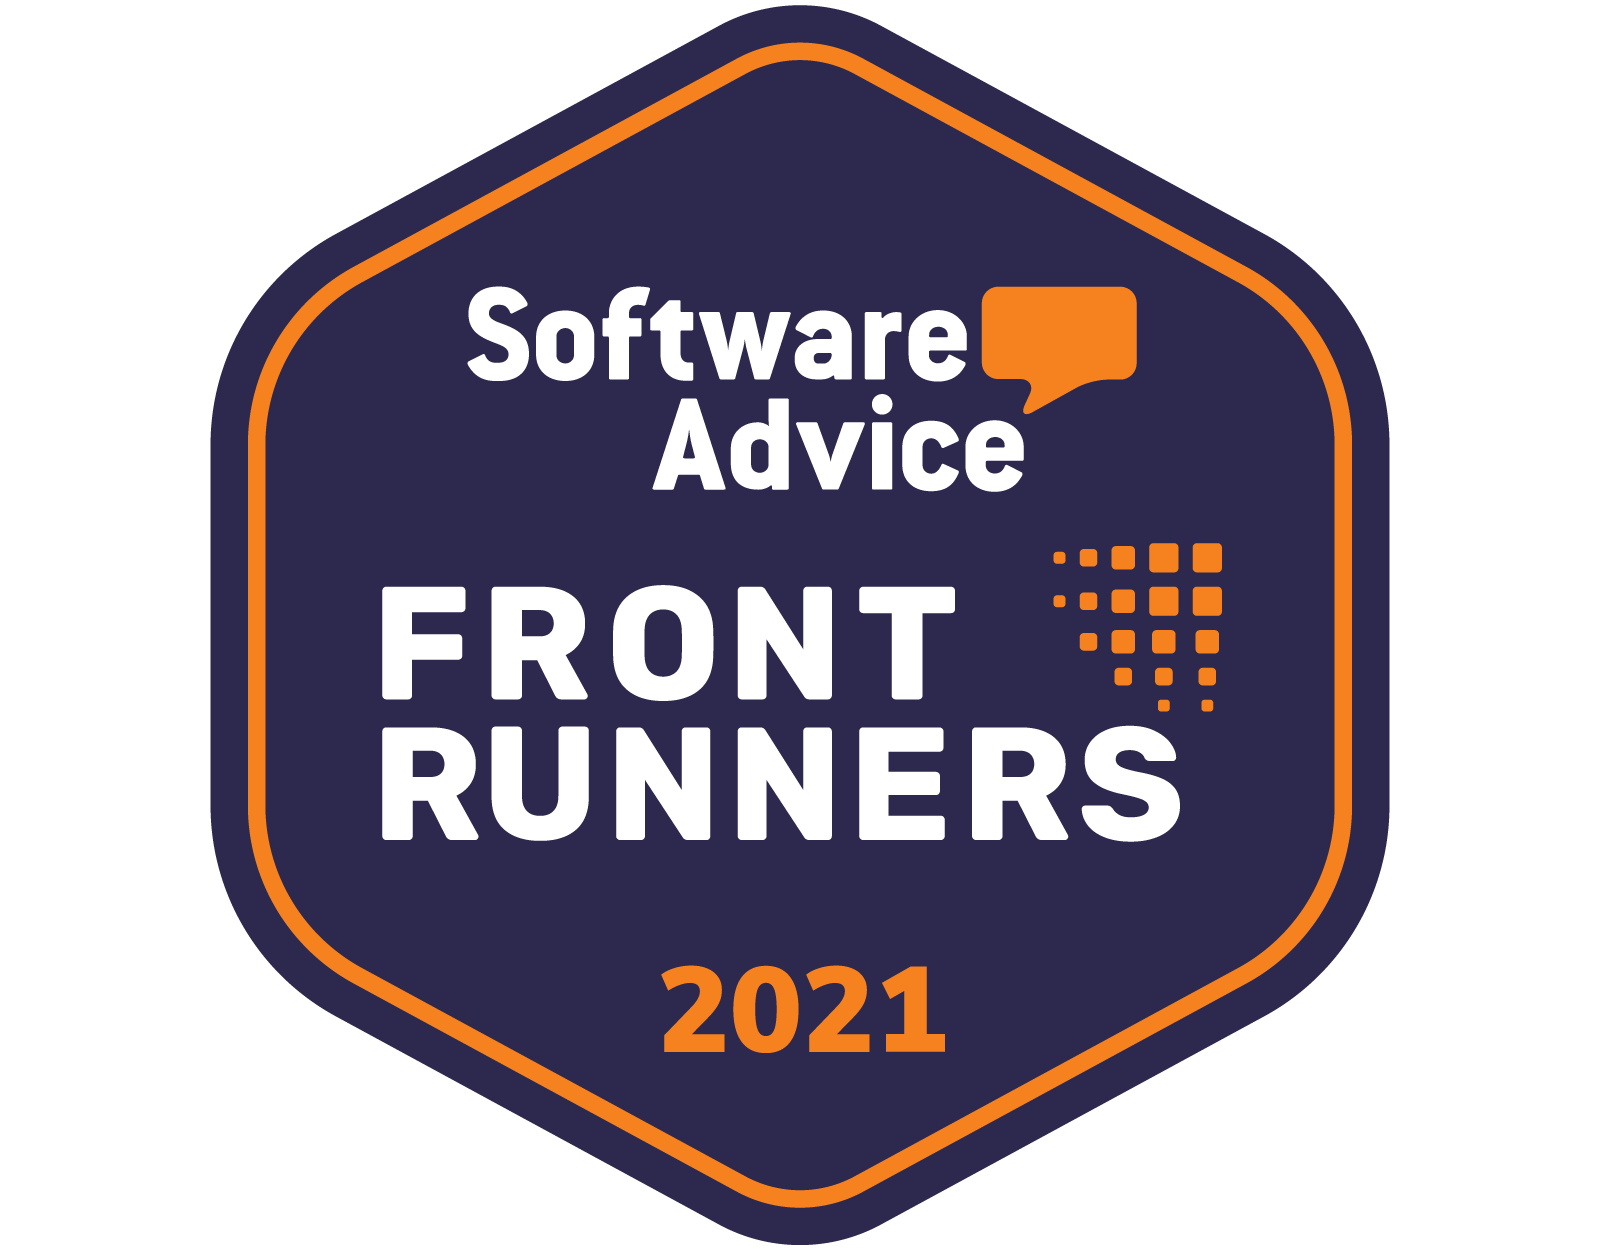 Software Advice Frontrunners for Accounting Jan-21